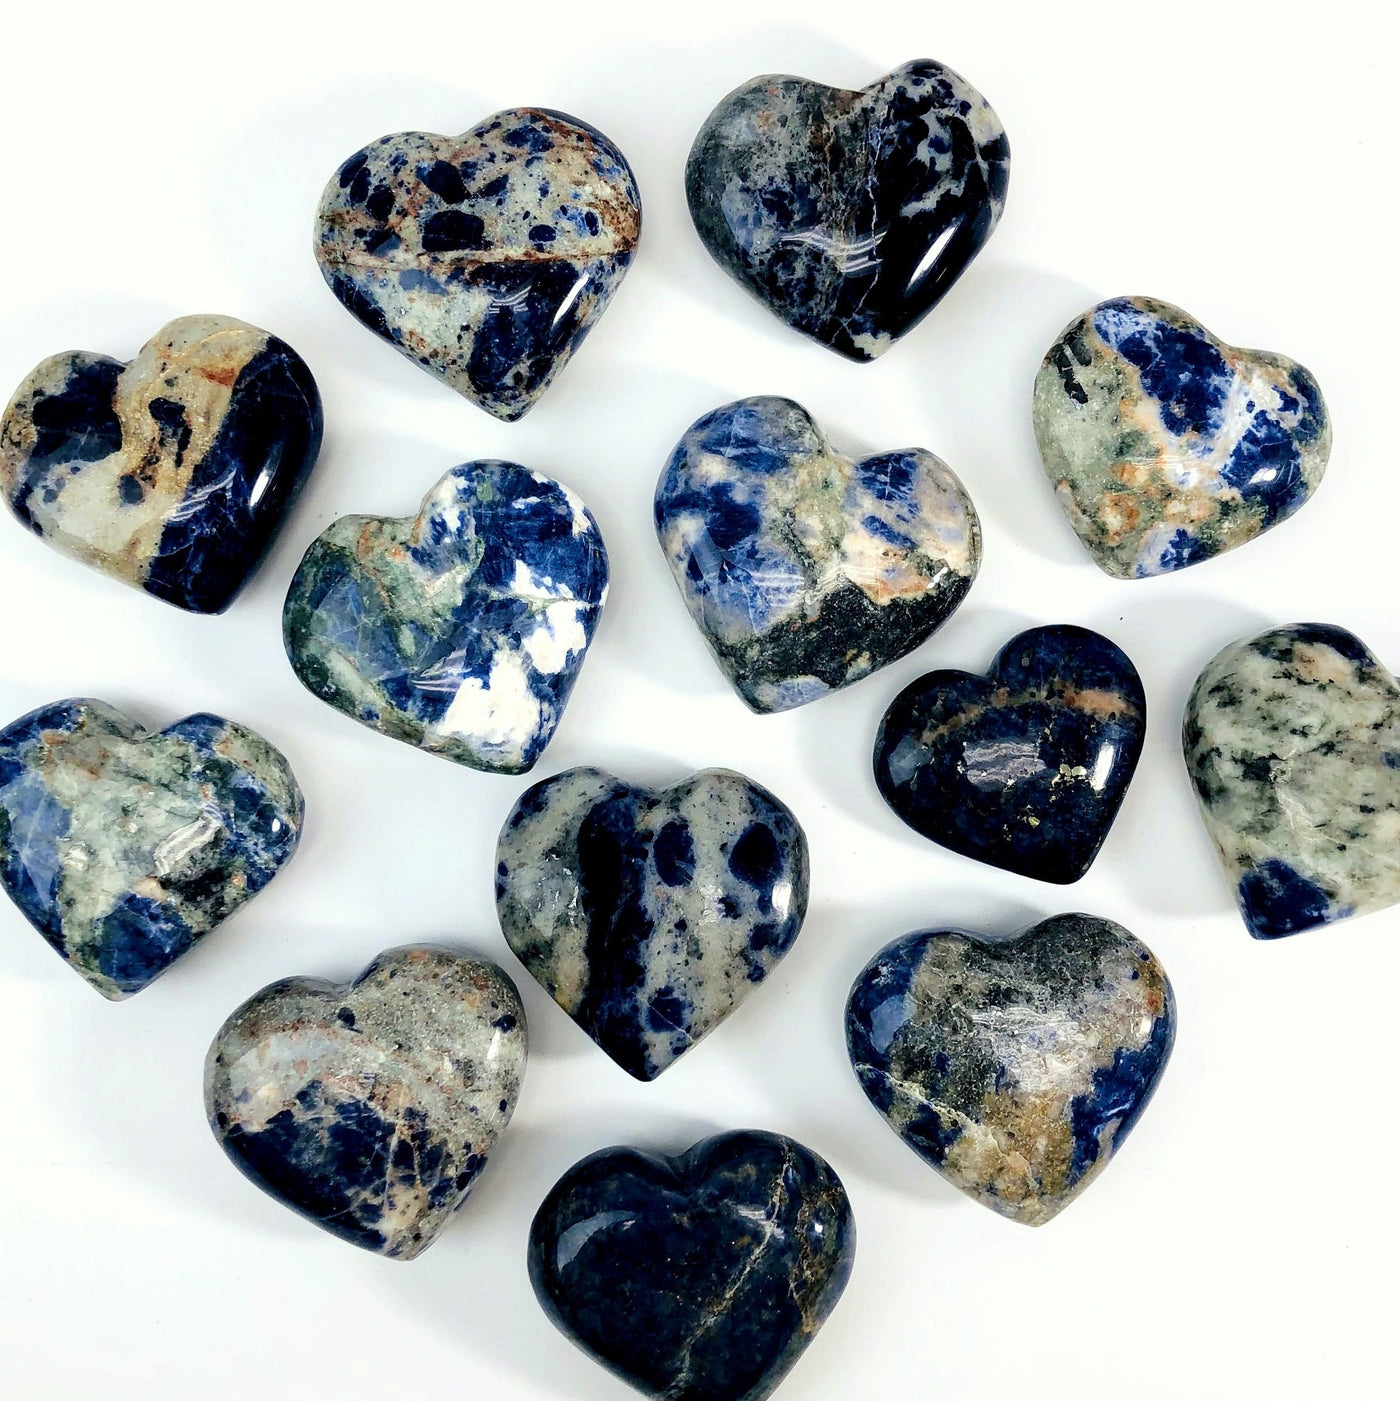 overhead view of many sodalite heart shaped stones on white background for possible variations